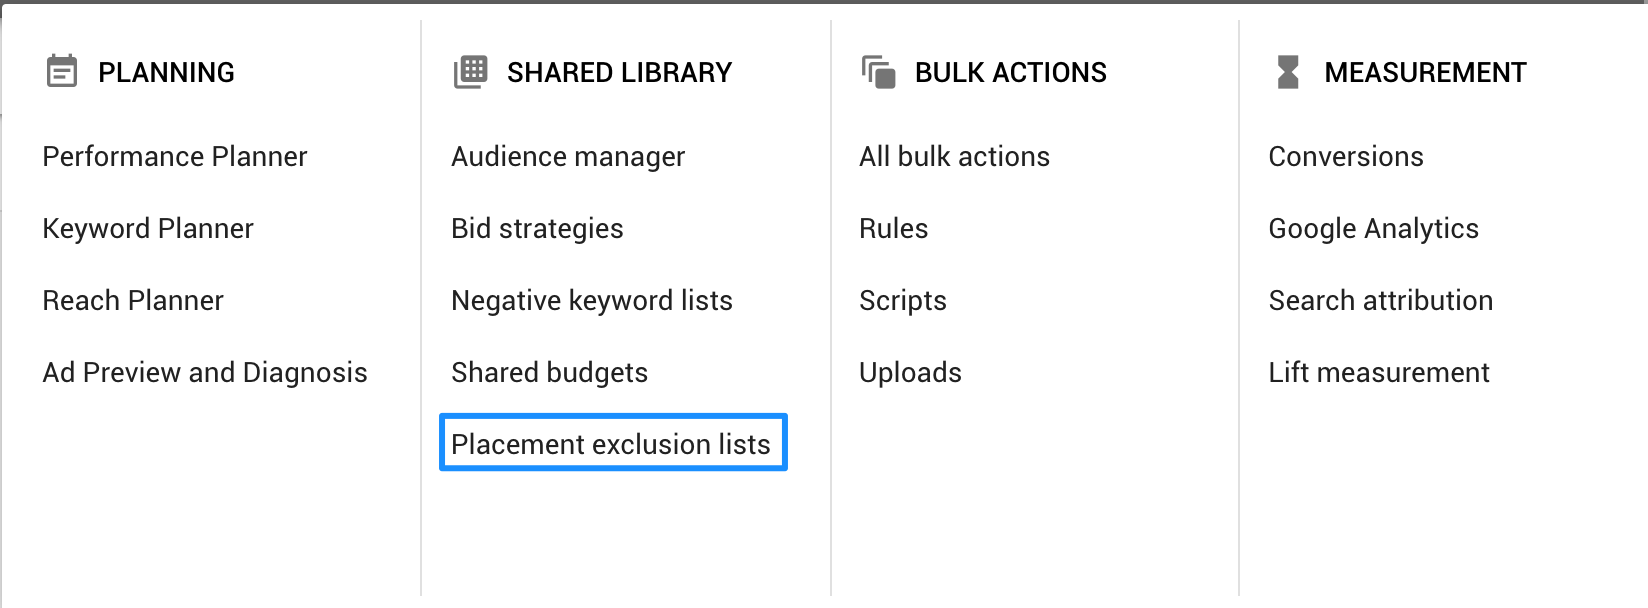 Google Placement Exclusion Lists